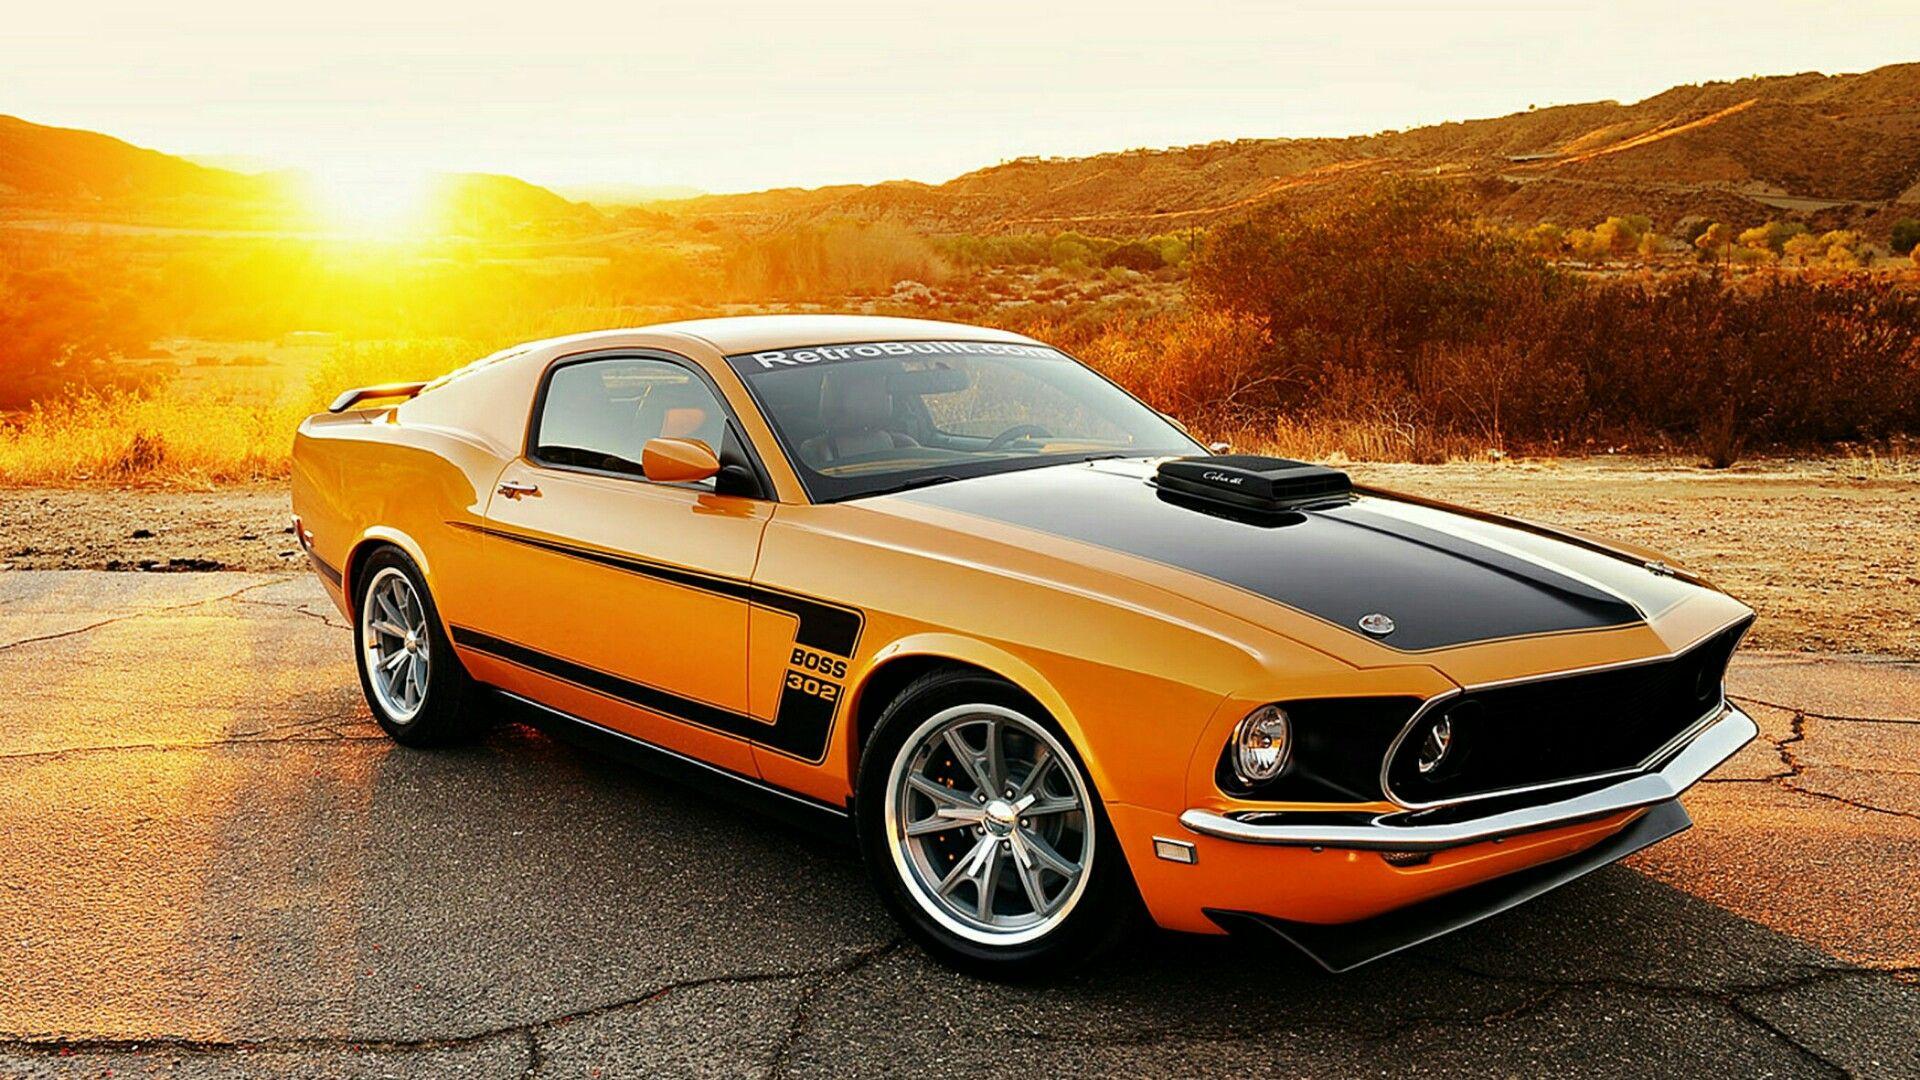 Ford Mustang Boss 302 Wallpapers Top Free Ford Mustang Boss 302 Backgrounds Wallpaperaccess